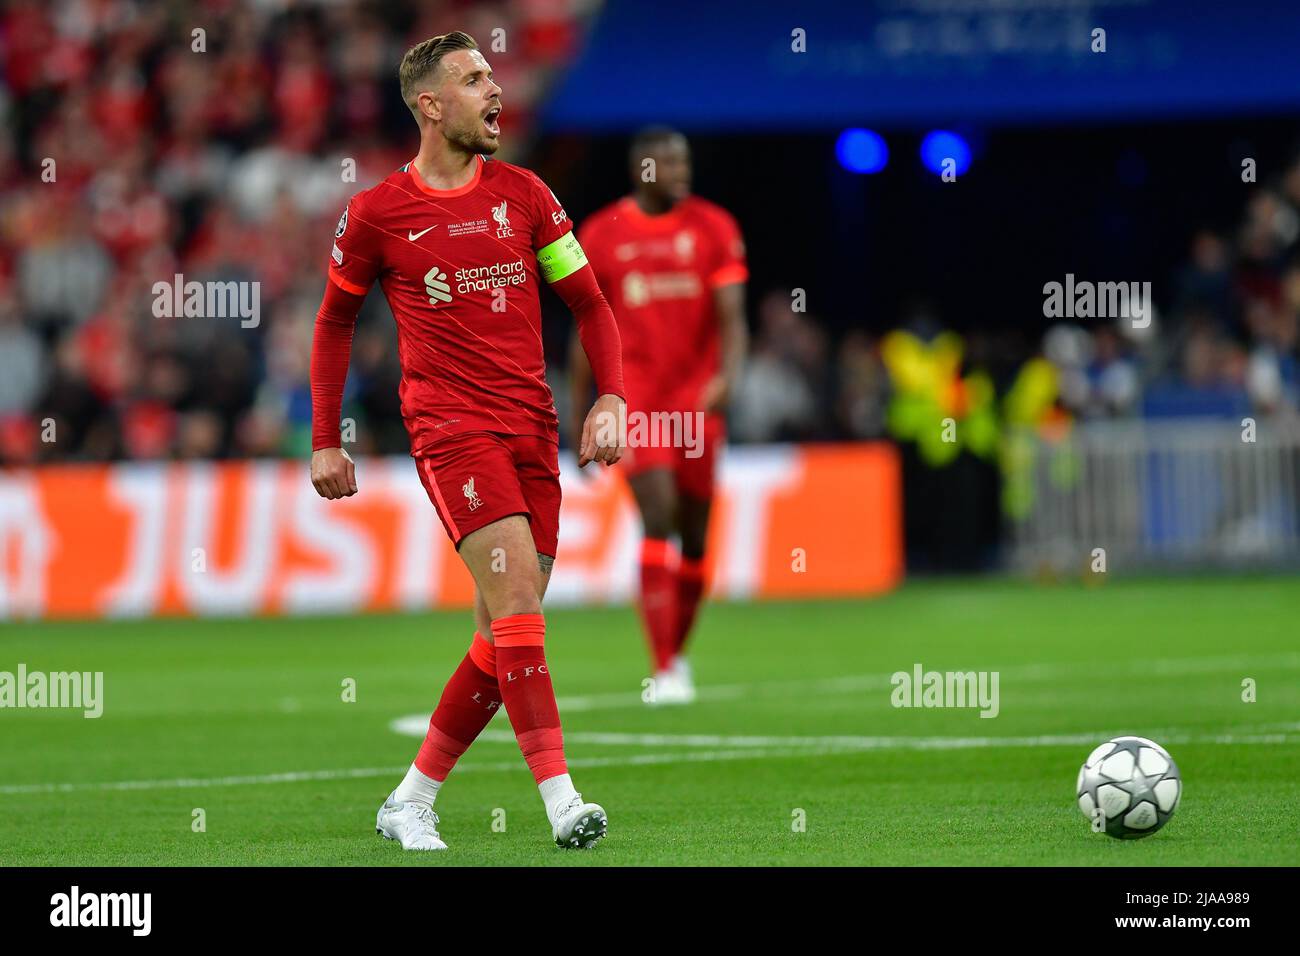 Paris, France. 28th, May 2022. Jordan Henderson (14) of Liverpool seen during the UEFA Champions League final between Liverpool and Real Madrid at the Stade de France in Paris. (Photo credit: Gonzales Photo - Tommaso Fimiano). Stock Photo